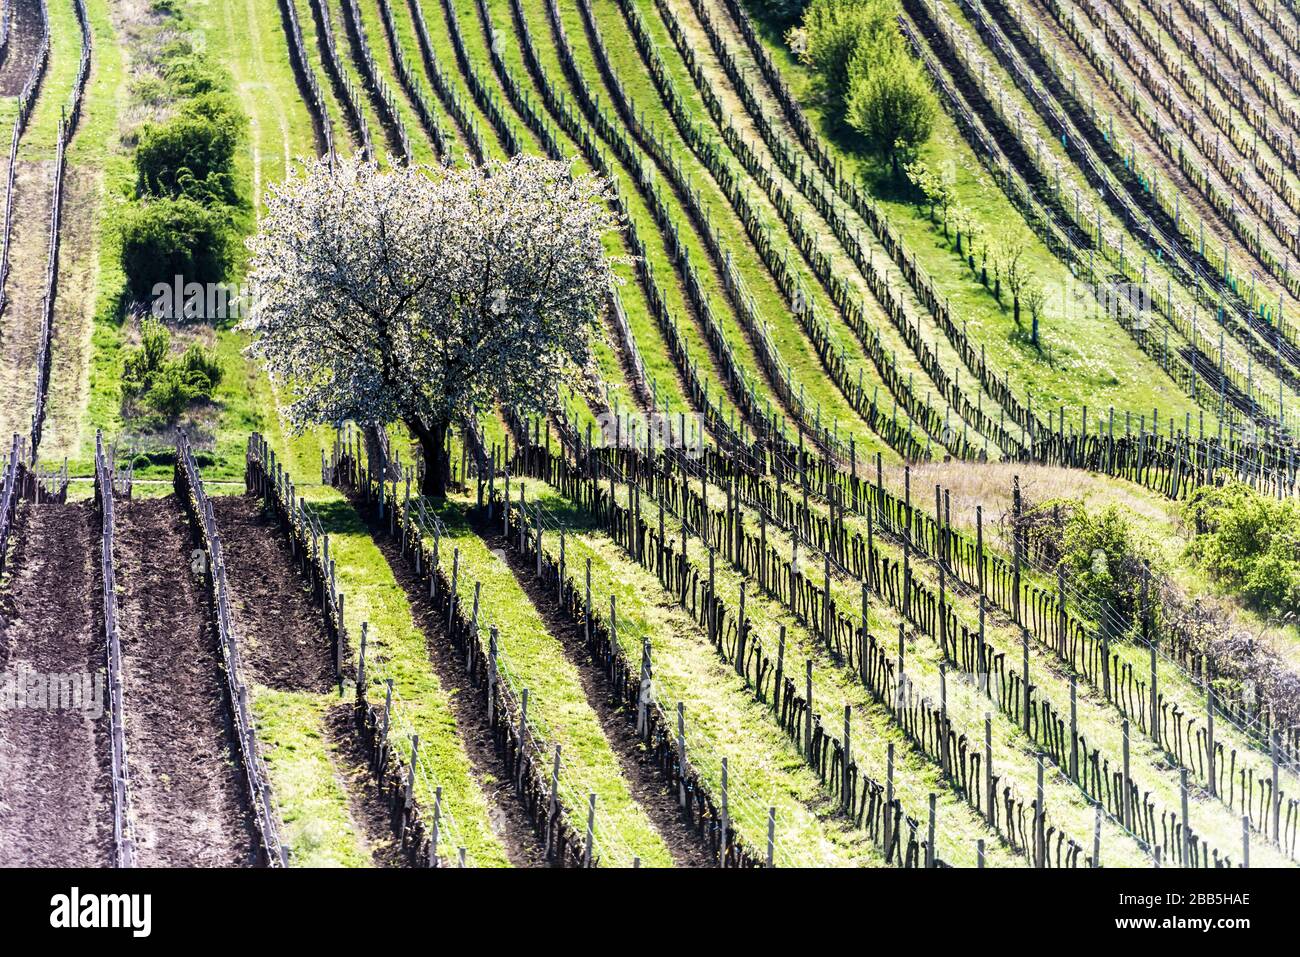 Amazing Spring Landscape With White Blossoming Cherry Tree Between Rows Of Vineyards In South Moravia, Czech Republic Stock Photo